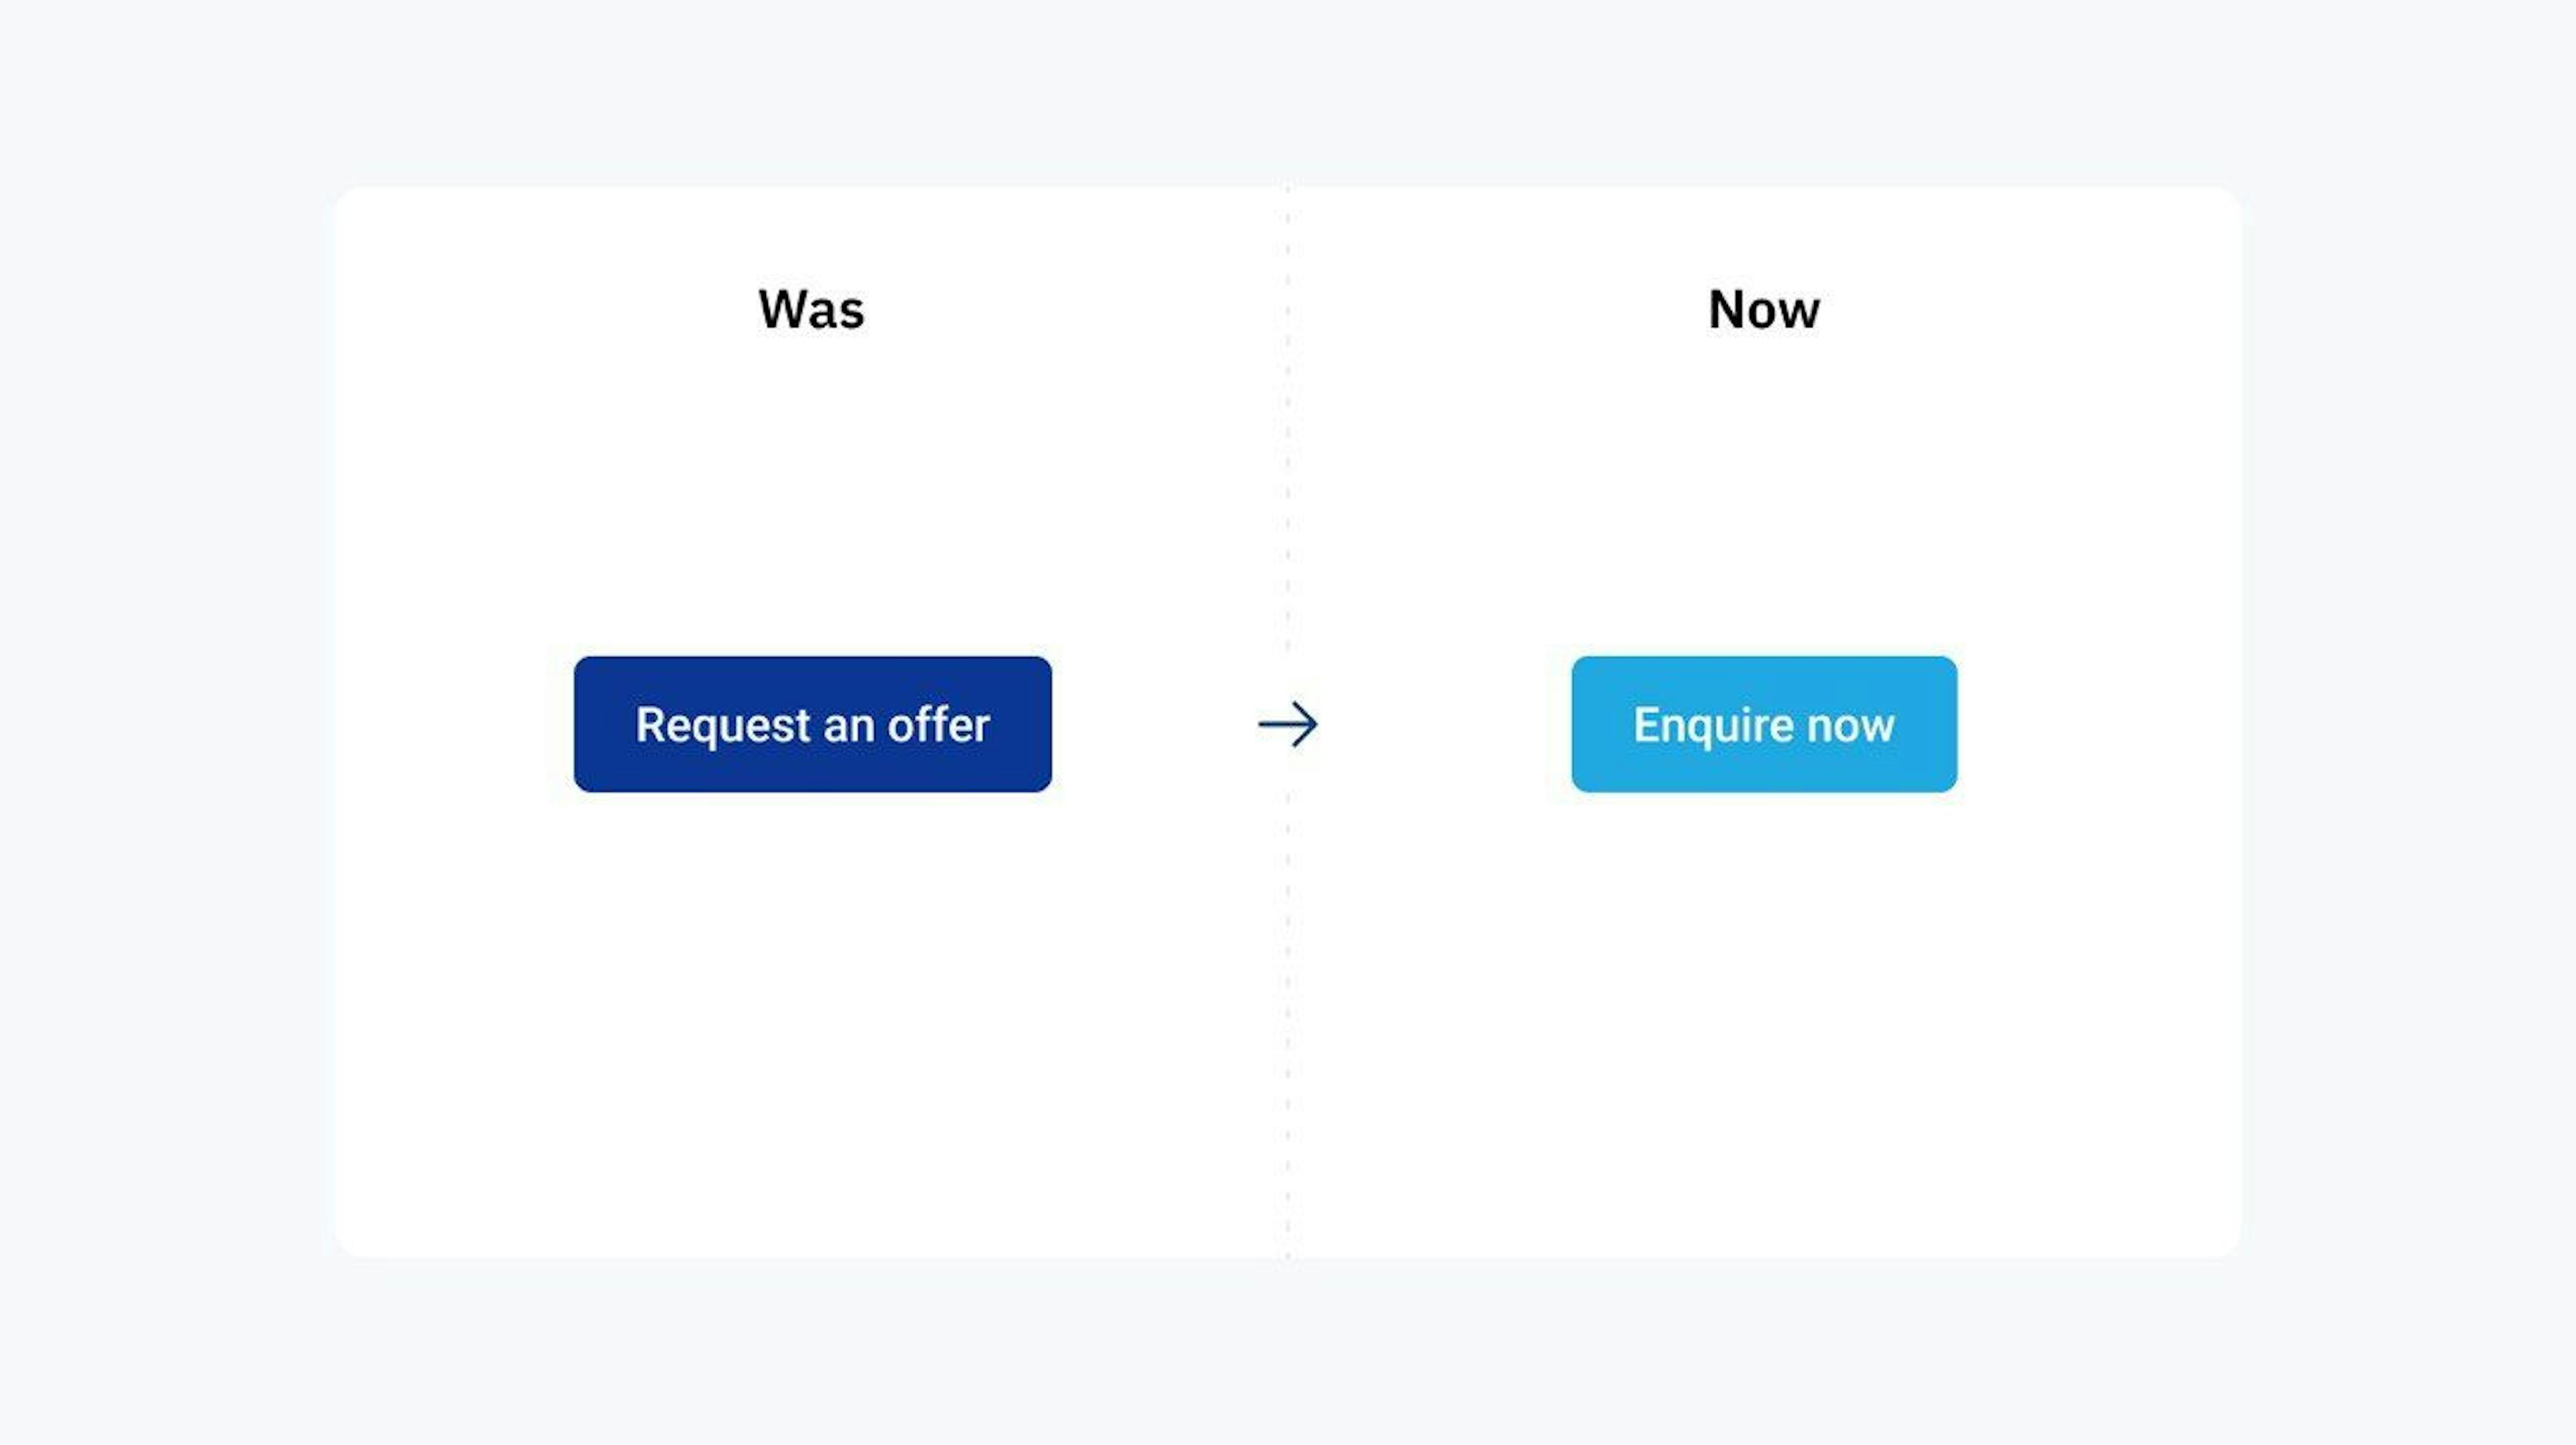 Previously: the old dark blue Request an offer button. New: new blue button Enquire now.